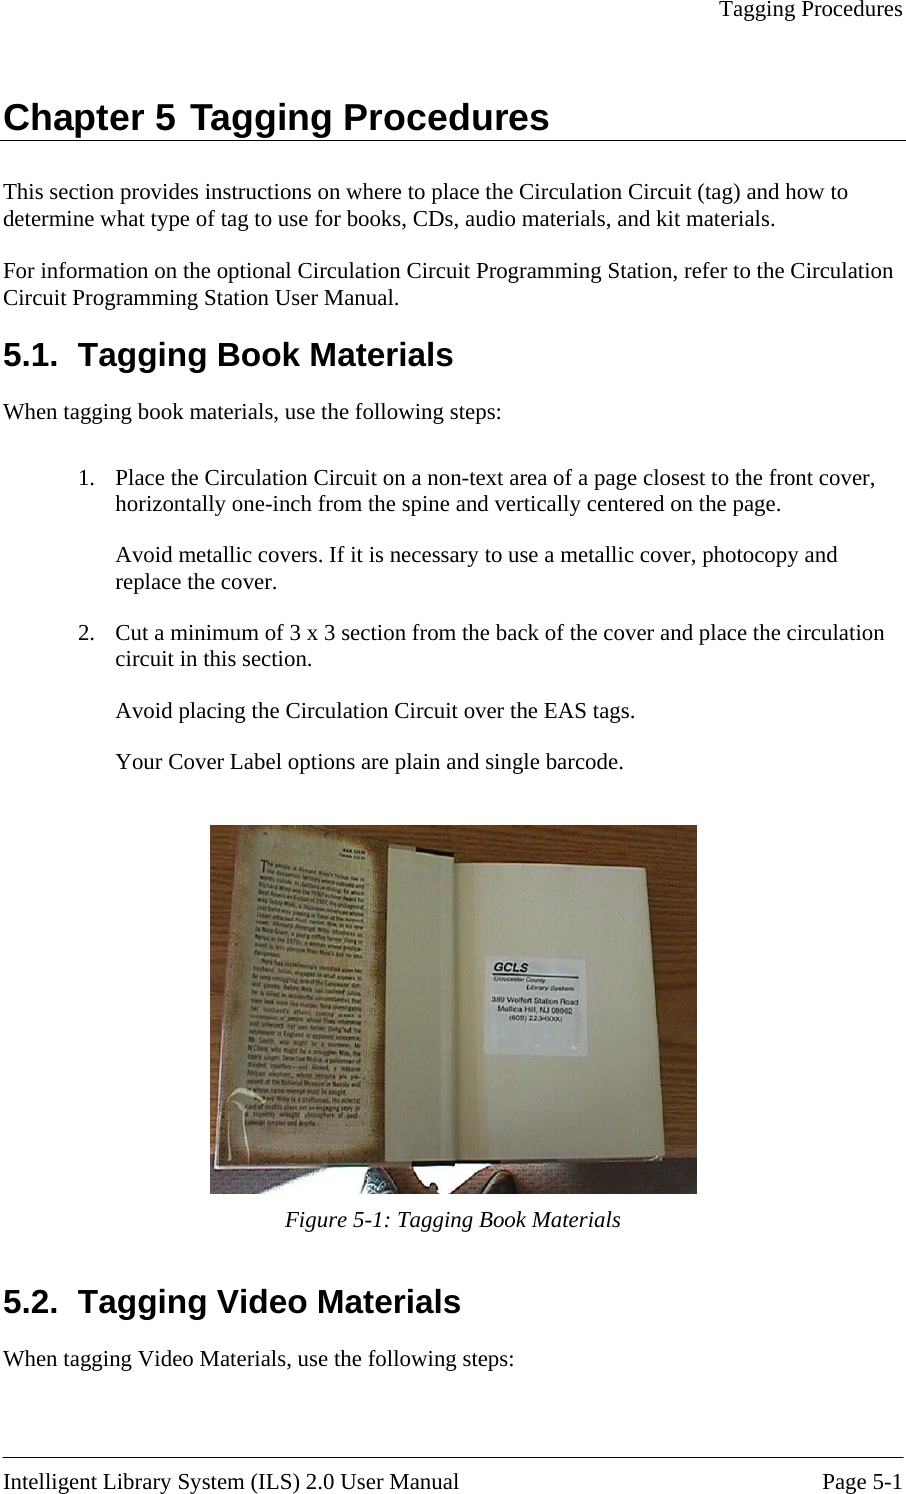   Tagging Procedures  Chapter 5 Tagging Procedures This secdetermin For infoCircuit P g.1.  Tagging Book Materials lation Circuit on a non-text area of a page closest to the front cover, horizontally one-inch from the spine and vertically centered on the page. Cut a minimum of 3 x 3 section from the back of the cover and place the circulation tion provides instructions on where to place the Circulation Circuit (tag) and how to e what type of tag to use for books, CDs, audio materials, and kit materials. rmation on the optional Circulation Circuit Programming Station, refer to the Circulation ro ramming Station User Manual. 5When tagging book materials, use the following steps:  1.  Place the CircuAvoid metallic covers. If it is necessary to use a metallic cover, photocopy and replace the cover. 2.  circuit in this section. Avoid placing the Circulation Circuit over the EAS tags. Your Cover Label options are plain and single barcode.    Figure 5-1: Tagging Book Materials Tagging Video Materials hen tagging Video Materials, use the following steps: 5.2. W  Intelligent Library System (ILS) 2.0 User Manual  Page 5-1 